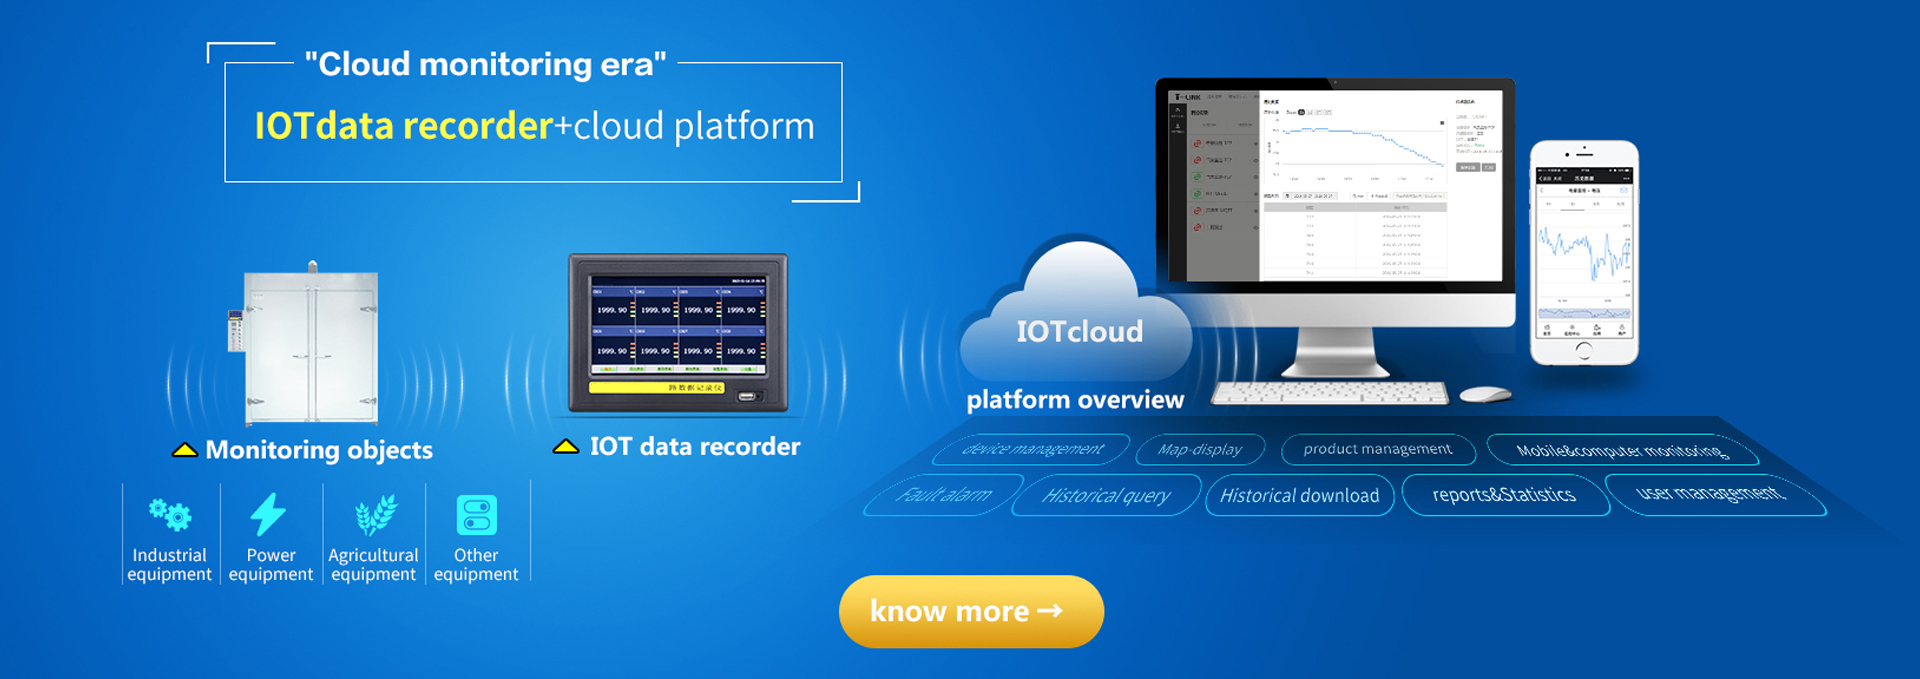 IoT monitor and cloud